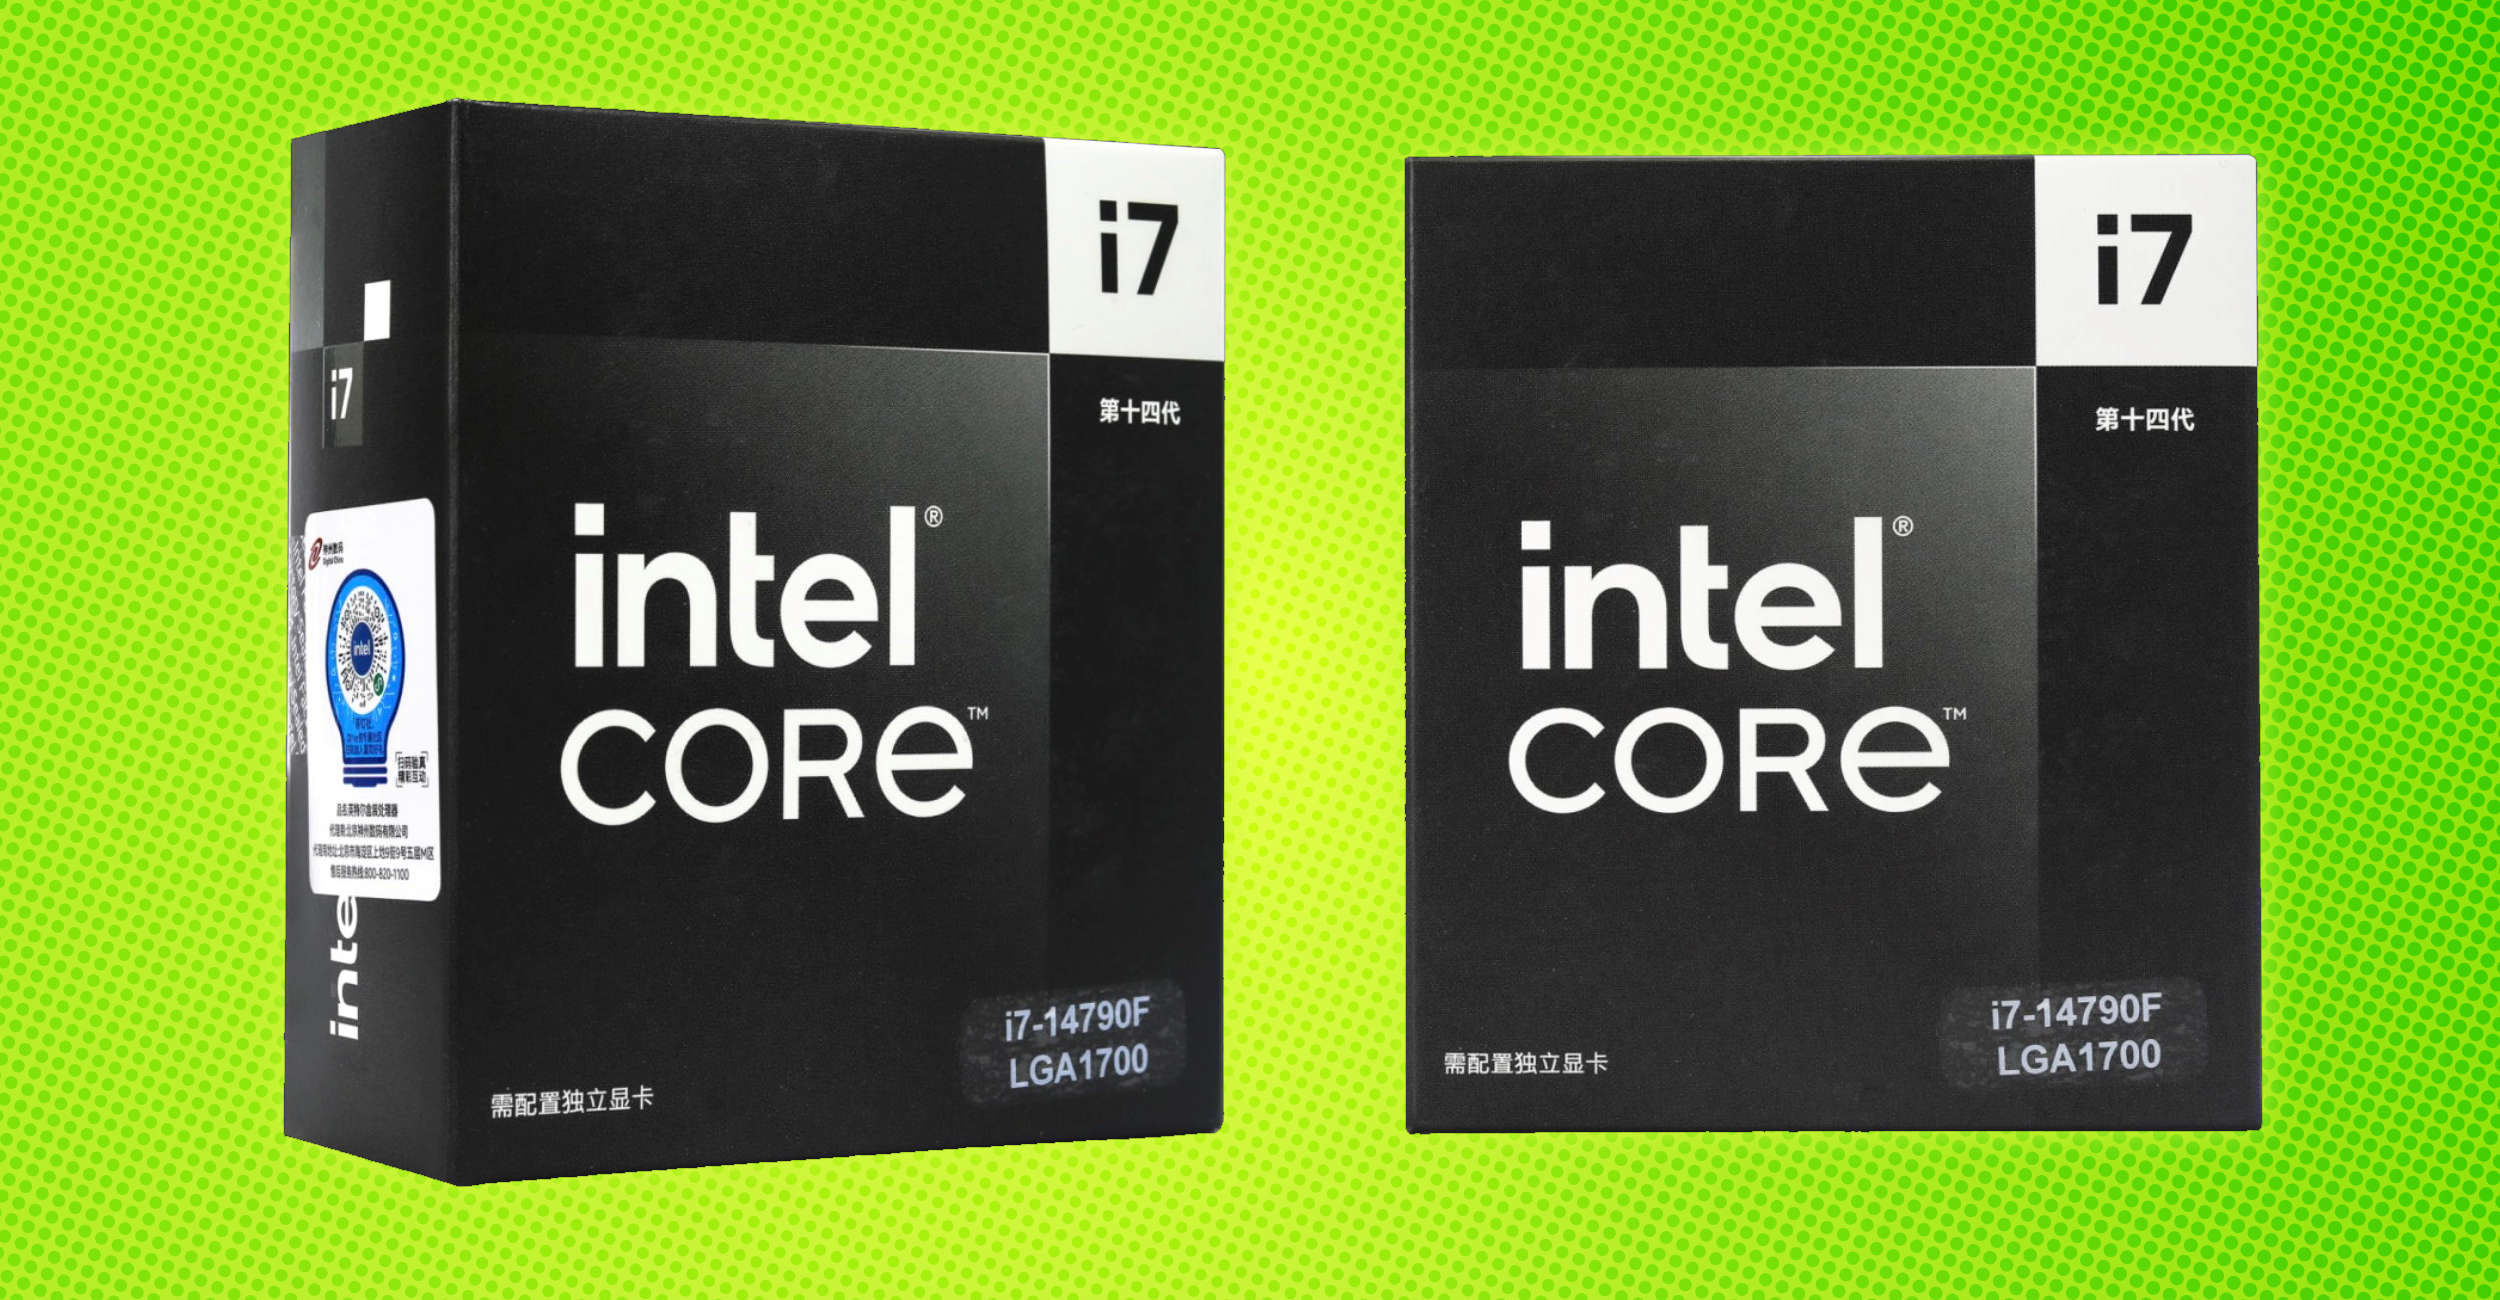 Intel Core i5-14400 Raptor Lake CPU with 10 cores benchmarked